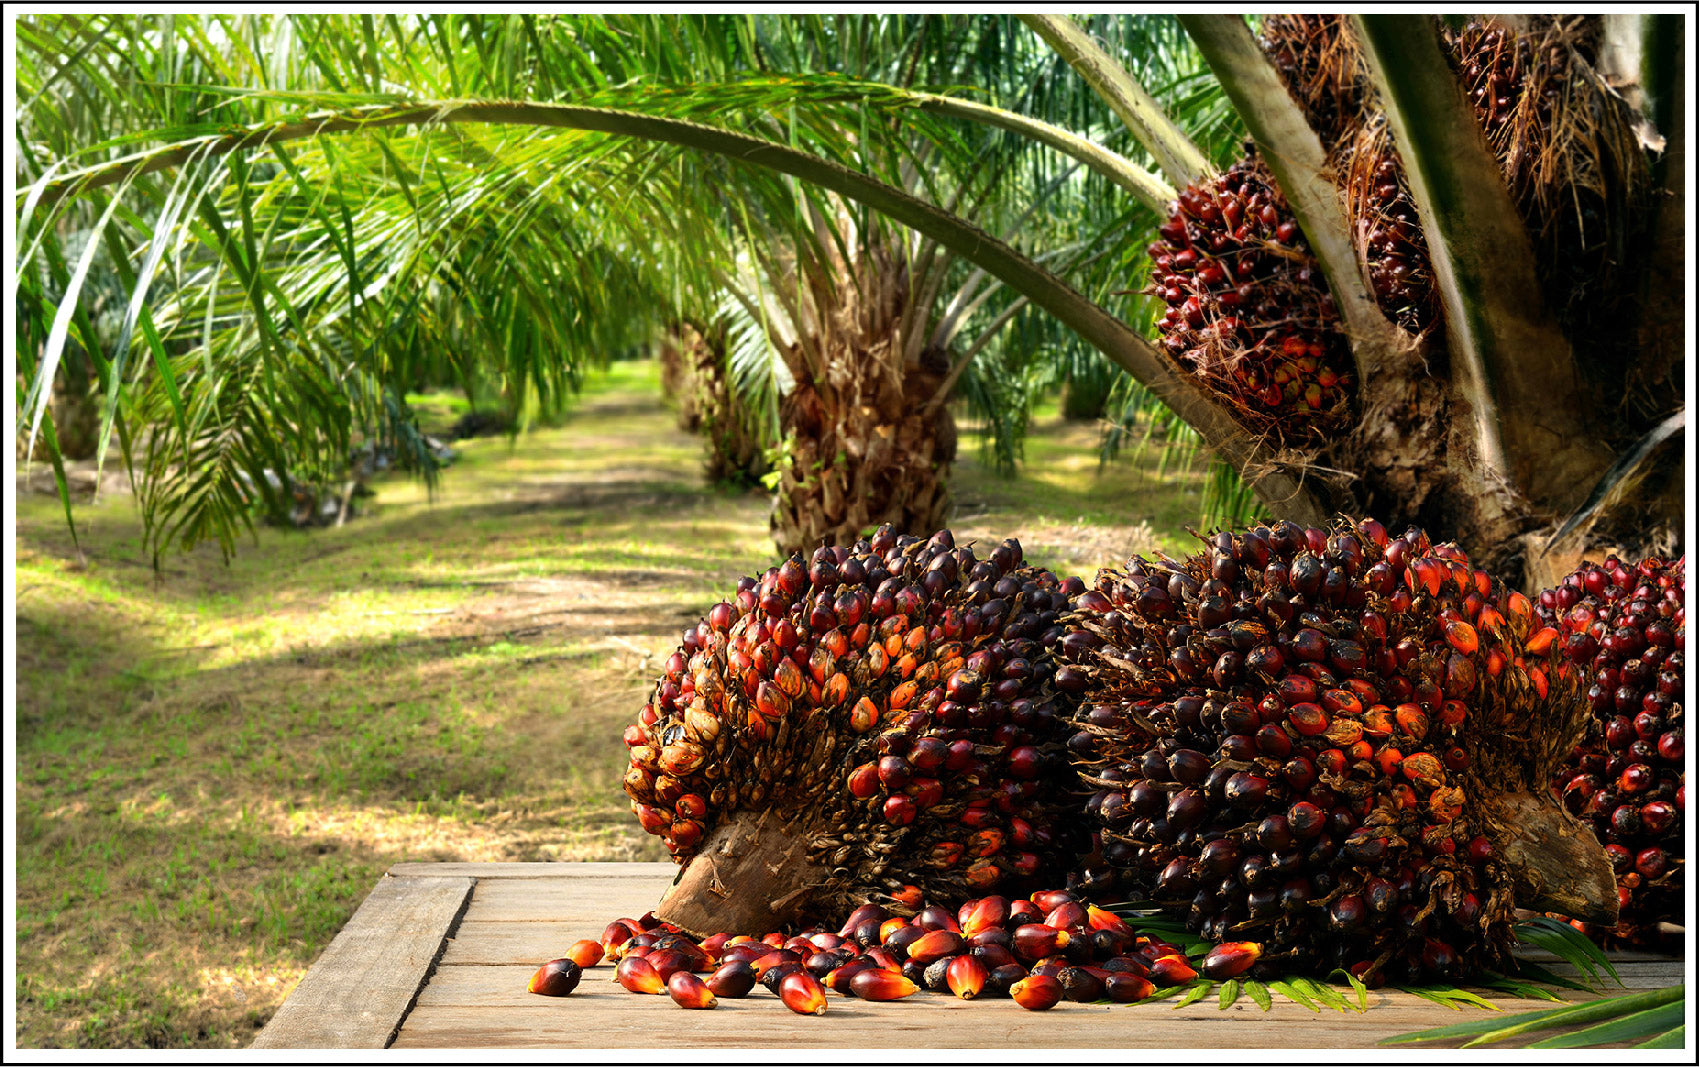 Palm Kernal Oil Soothe, Moisturizes, And Protects Skin From The Elements